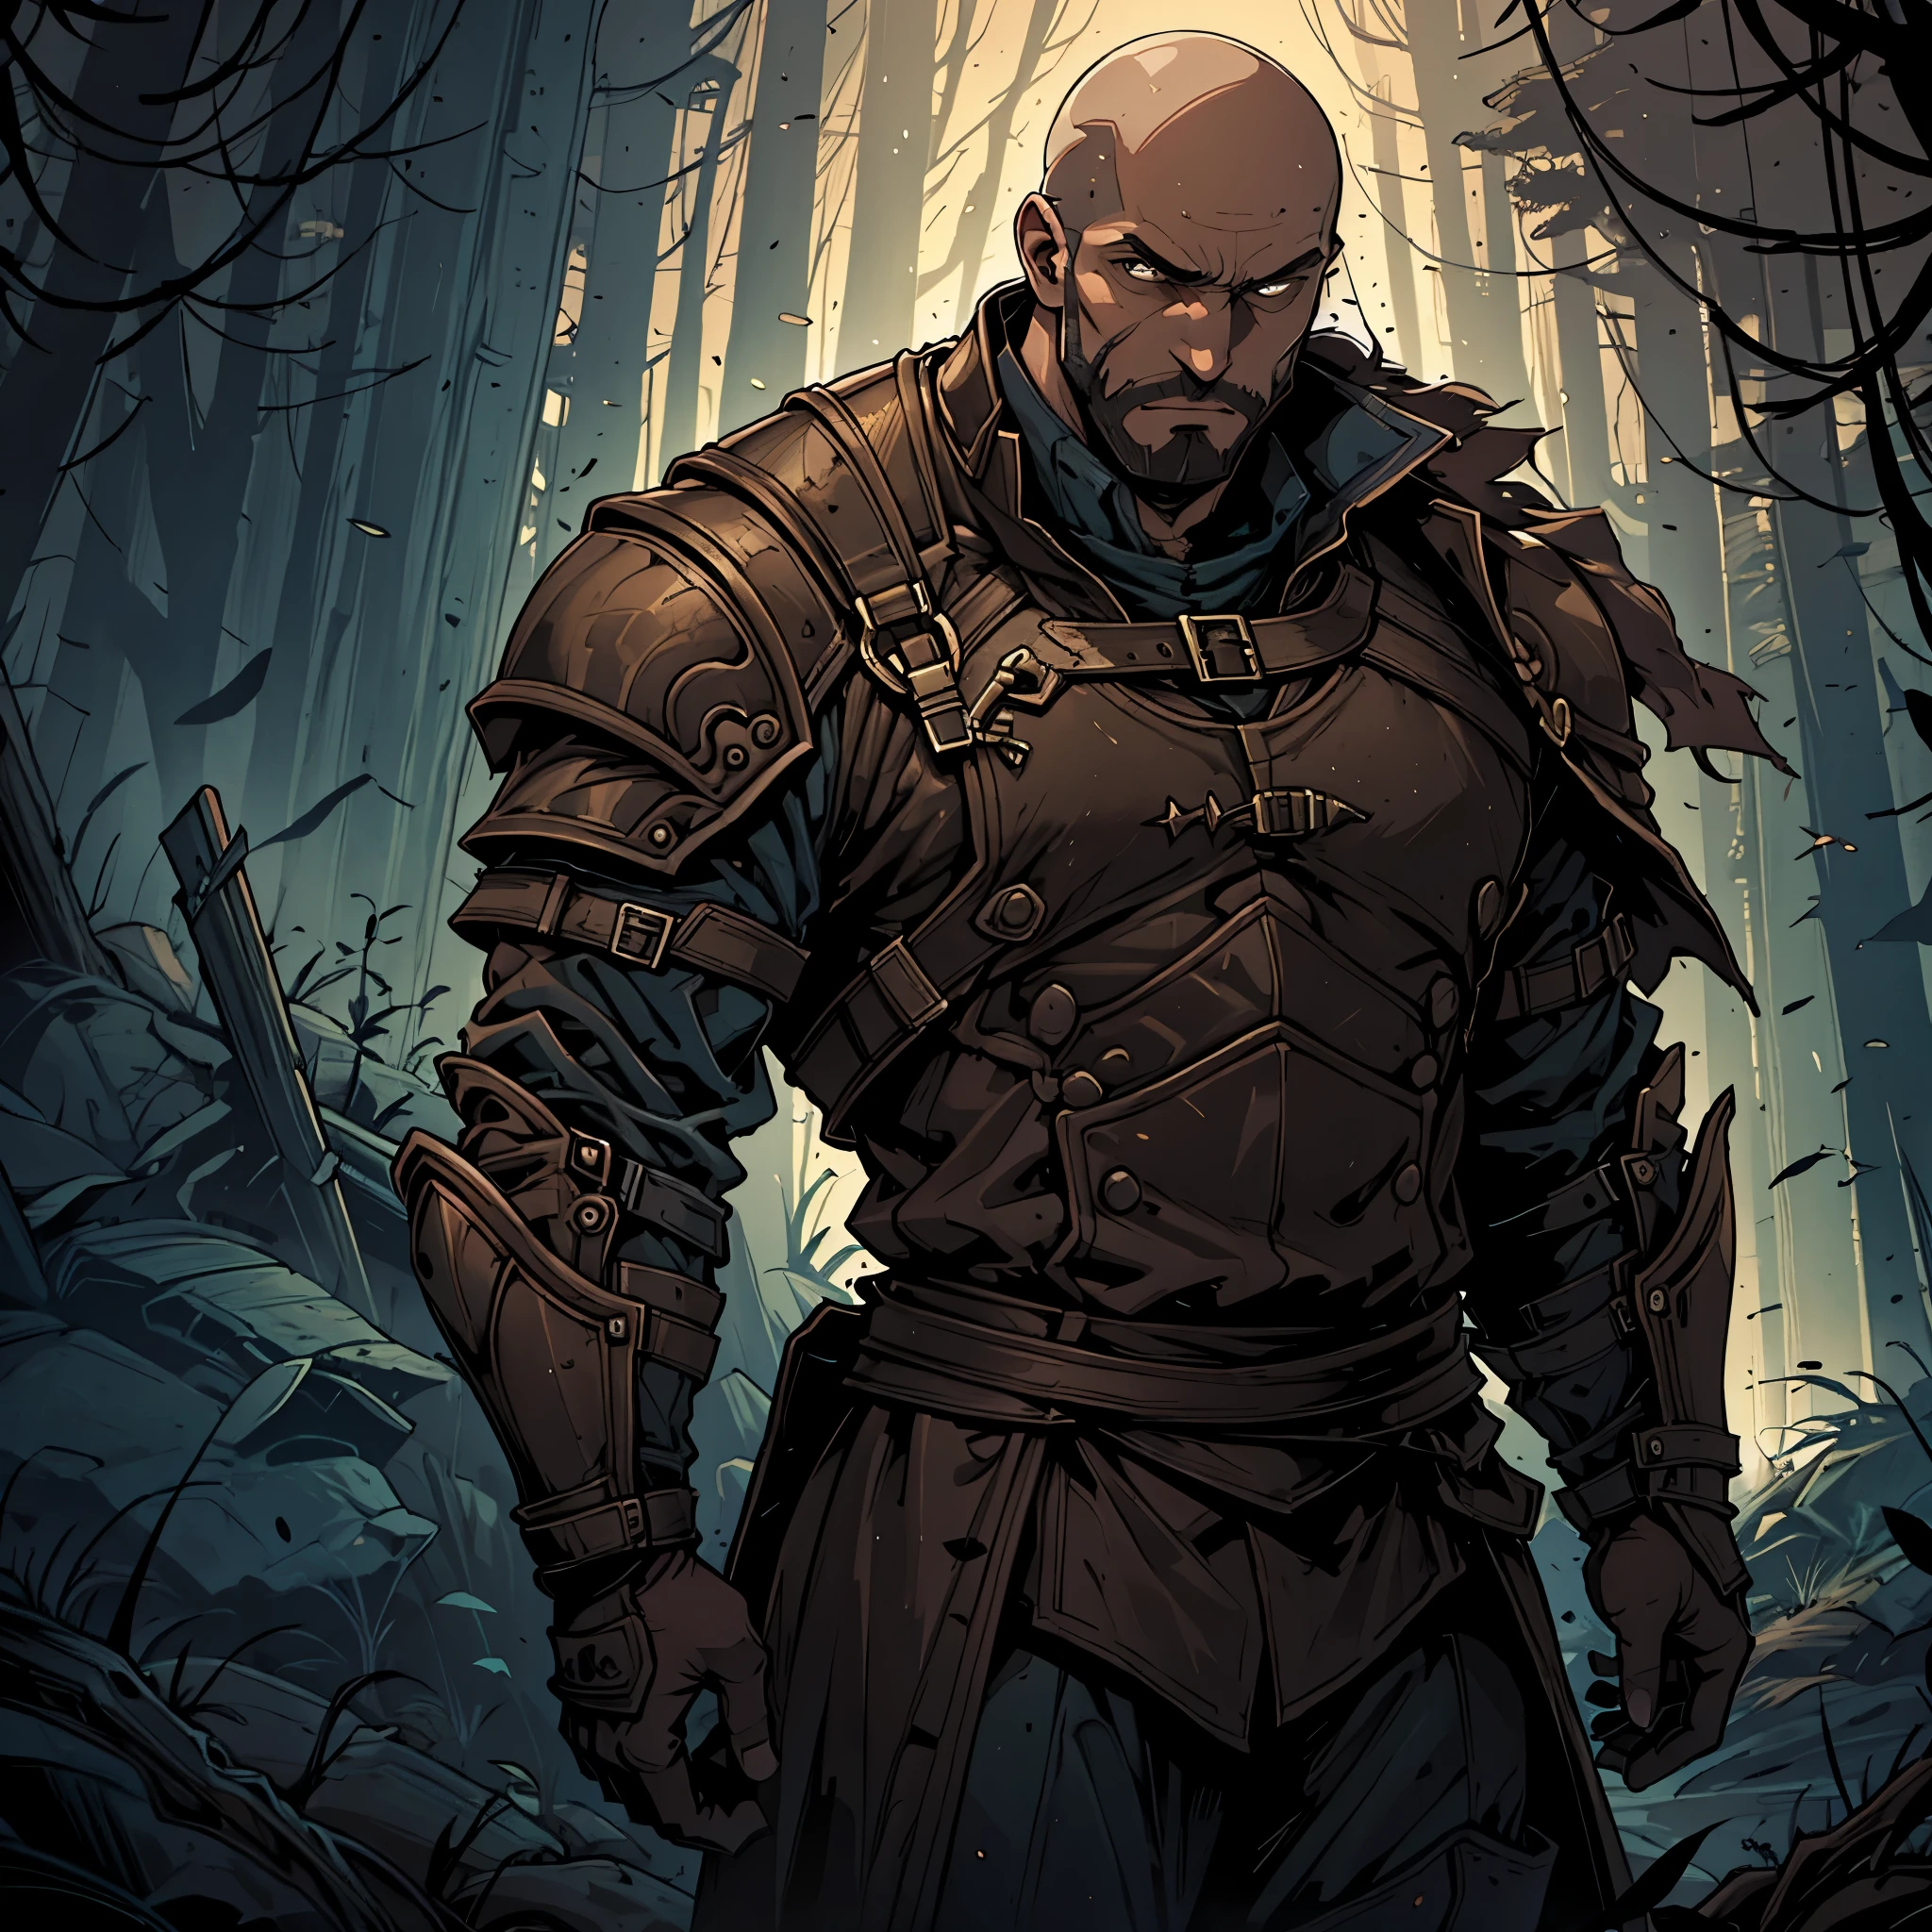 30 year old man, he is bald, with a brown beard, brown eyes, he is a knight-errant, very charismatic, serious look. Alone in a dark forest at night